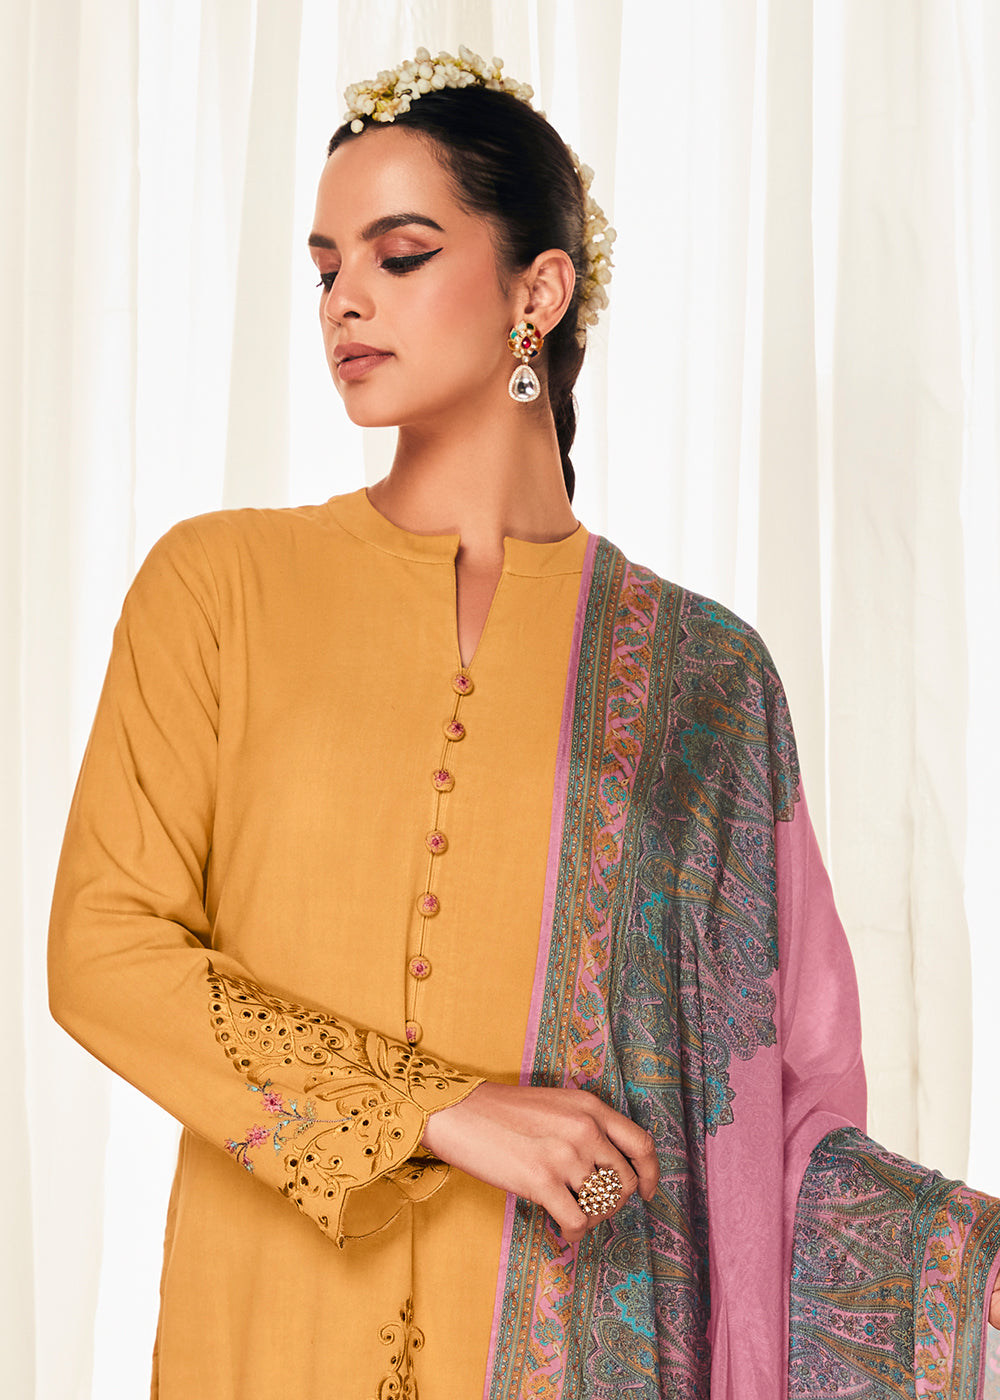 Buy Now Pleasing Yellow Suzani Inspired Embroidered Ethnic Salwar Suit Online in USA, UK, Canada, Germany, Australia & Worldwide at Empress Clothing.